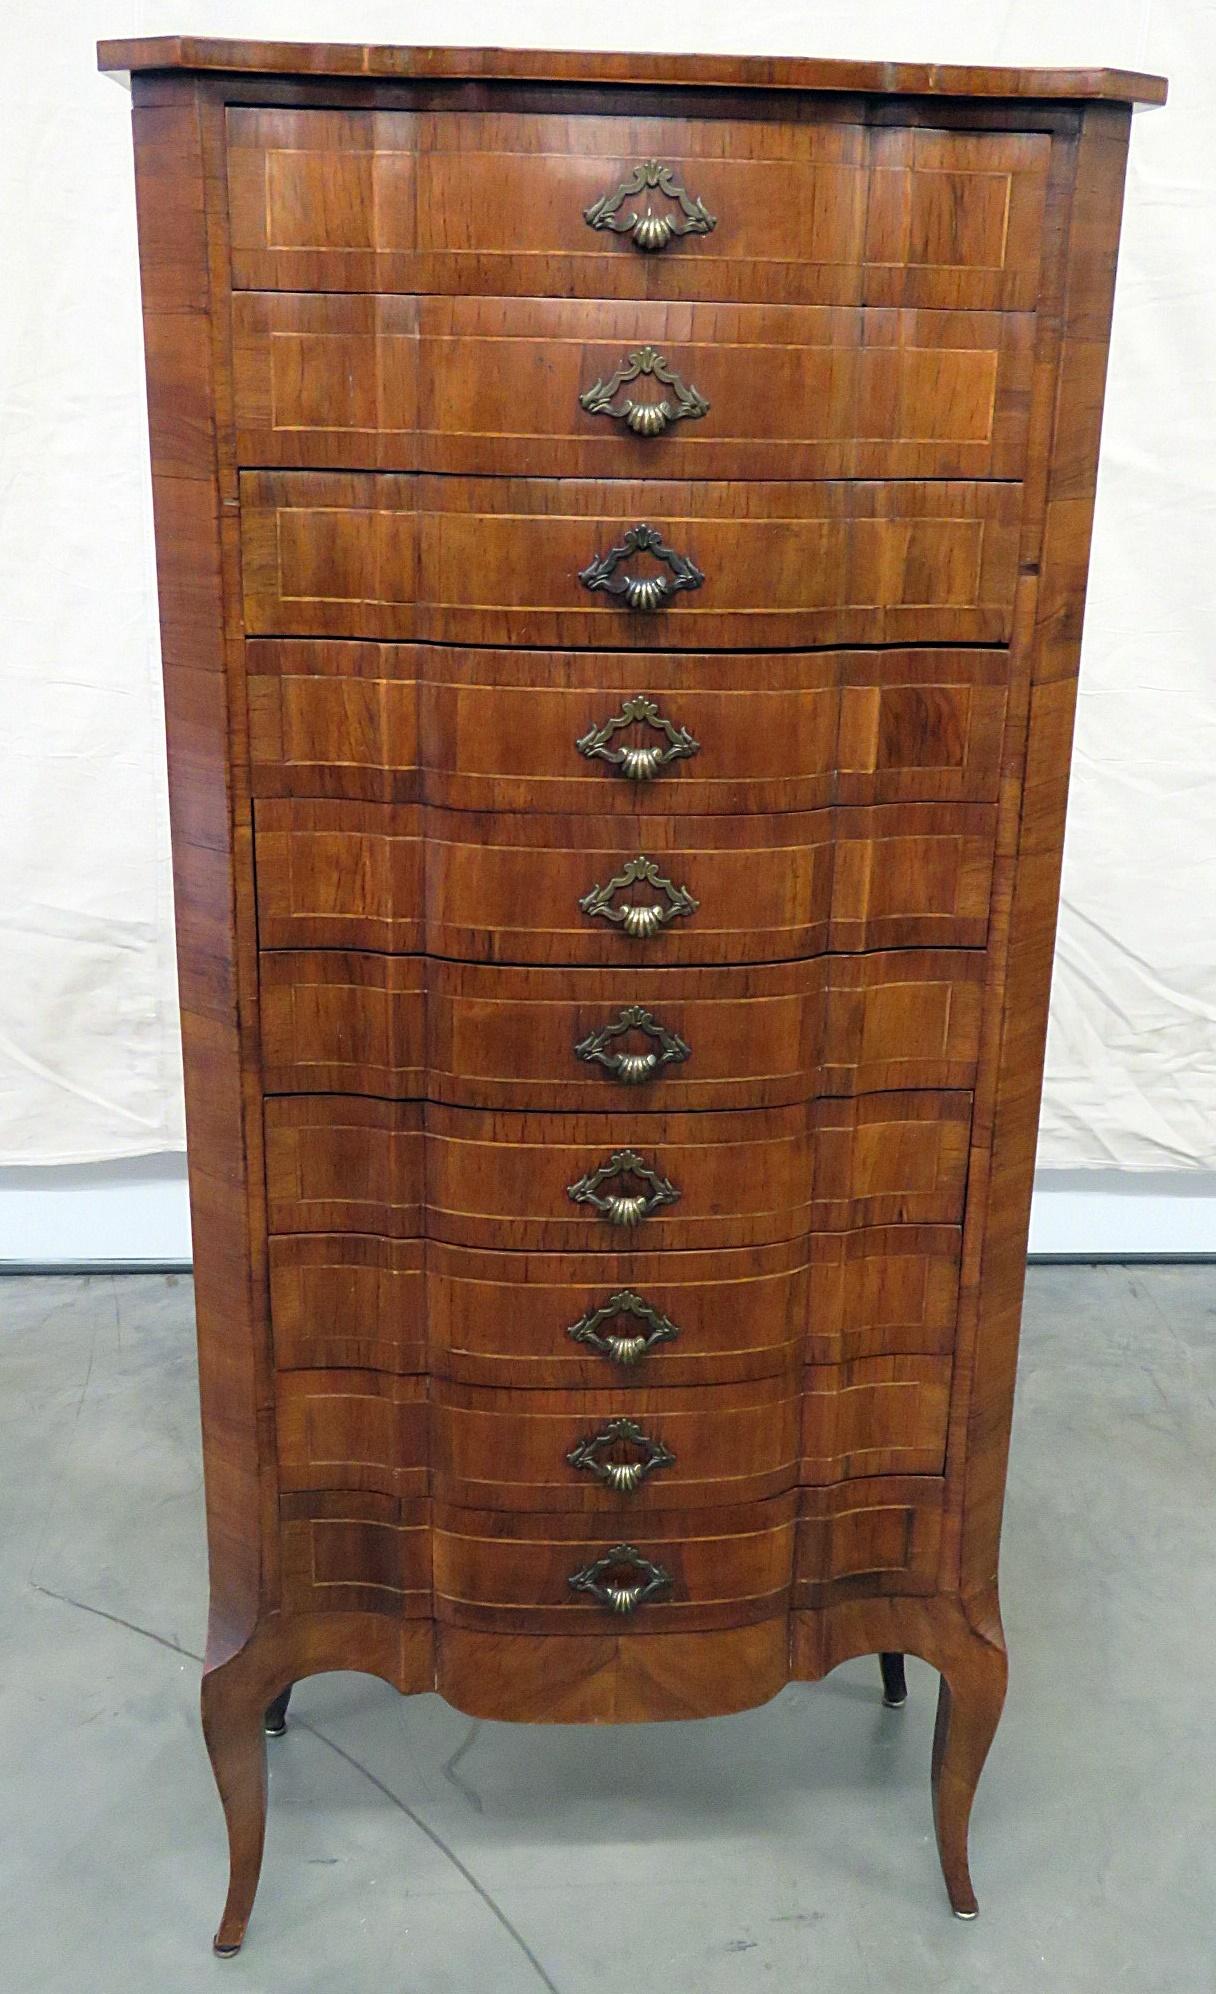 Louis XV style 10 drawer inlaid lingerie chest.